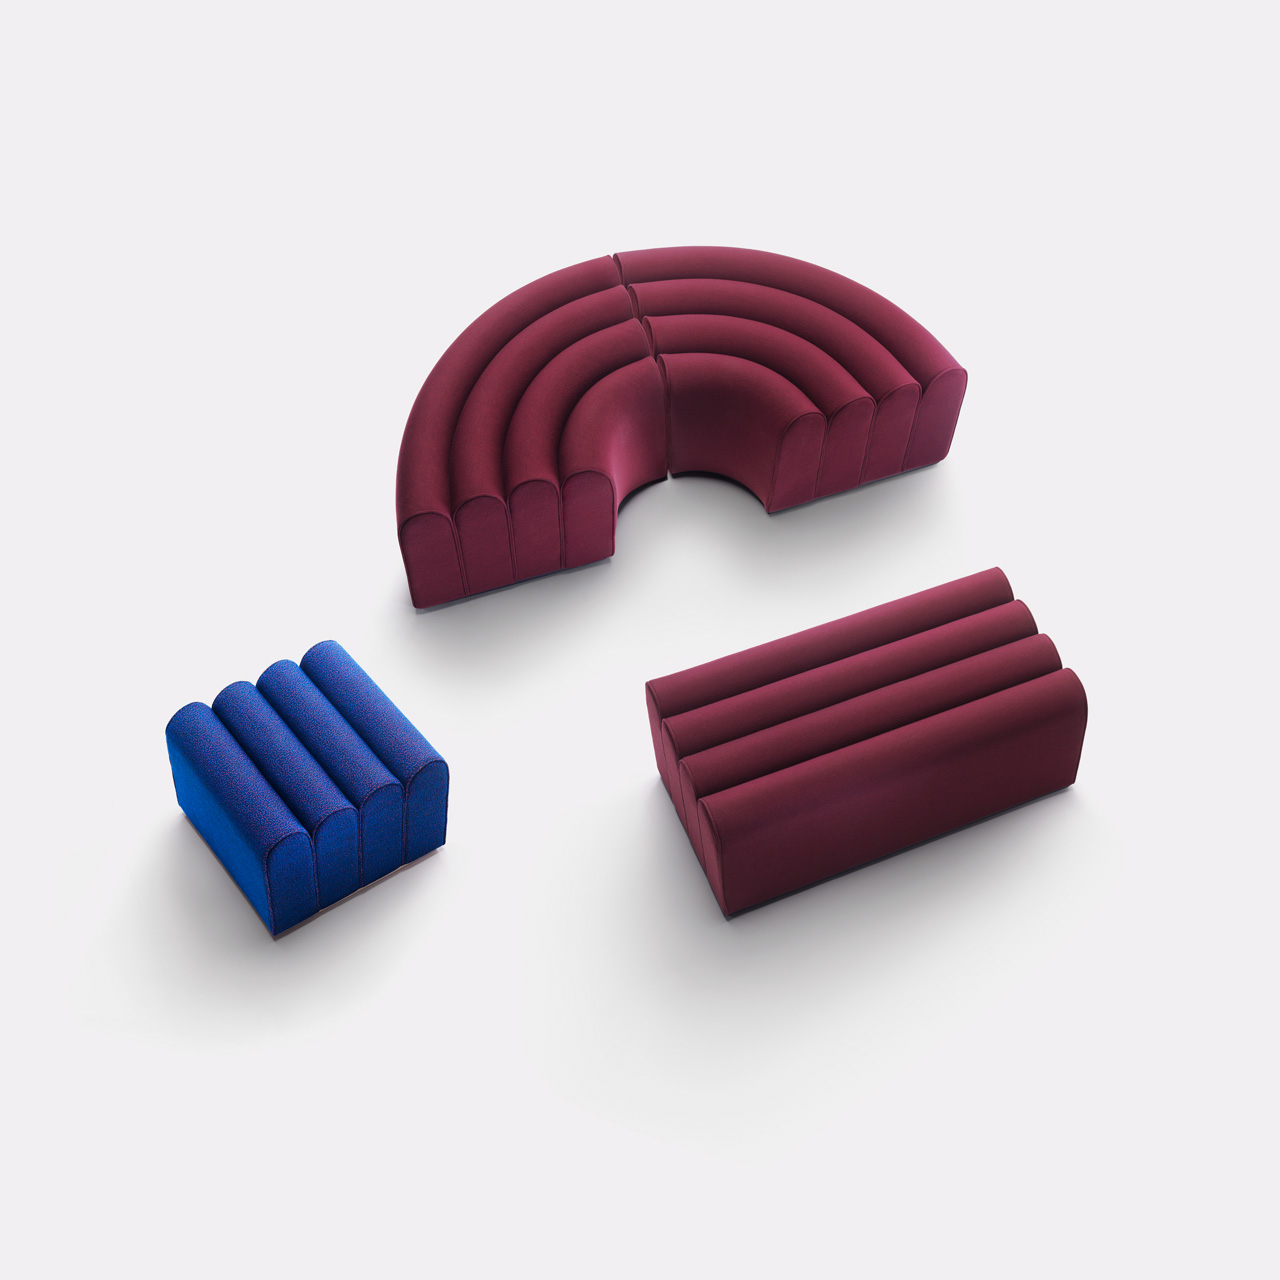 The Arch-Inspired Arkad Pouf Collection by Note Design Studio for Zilio A&C